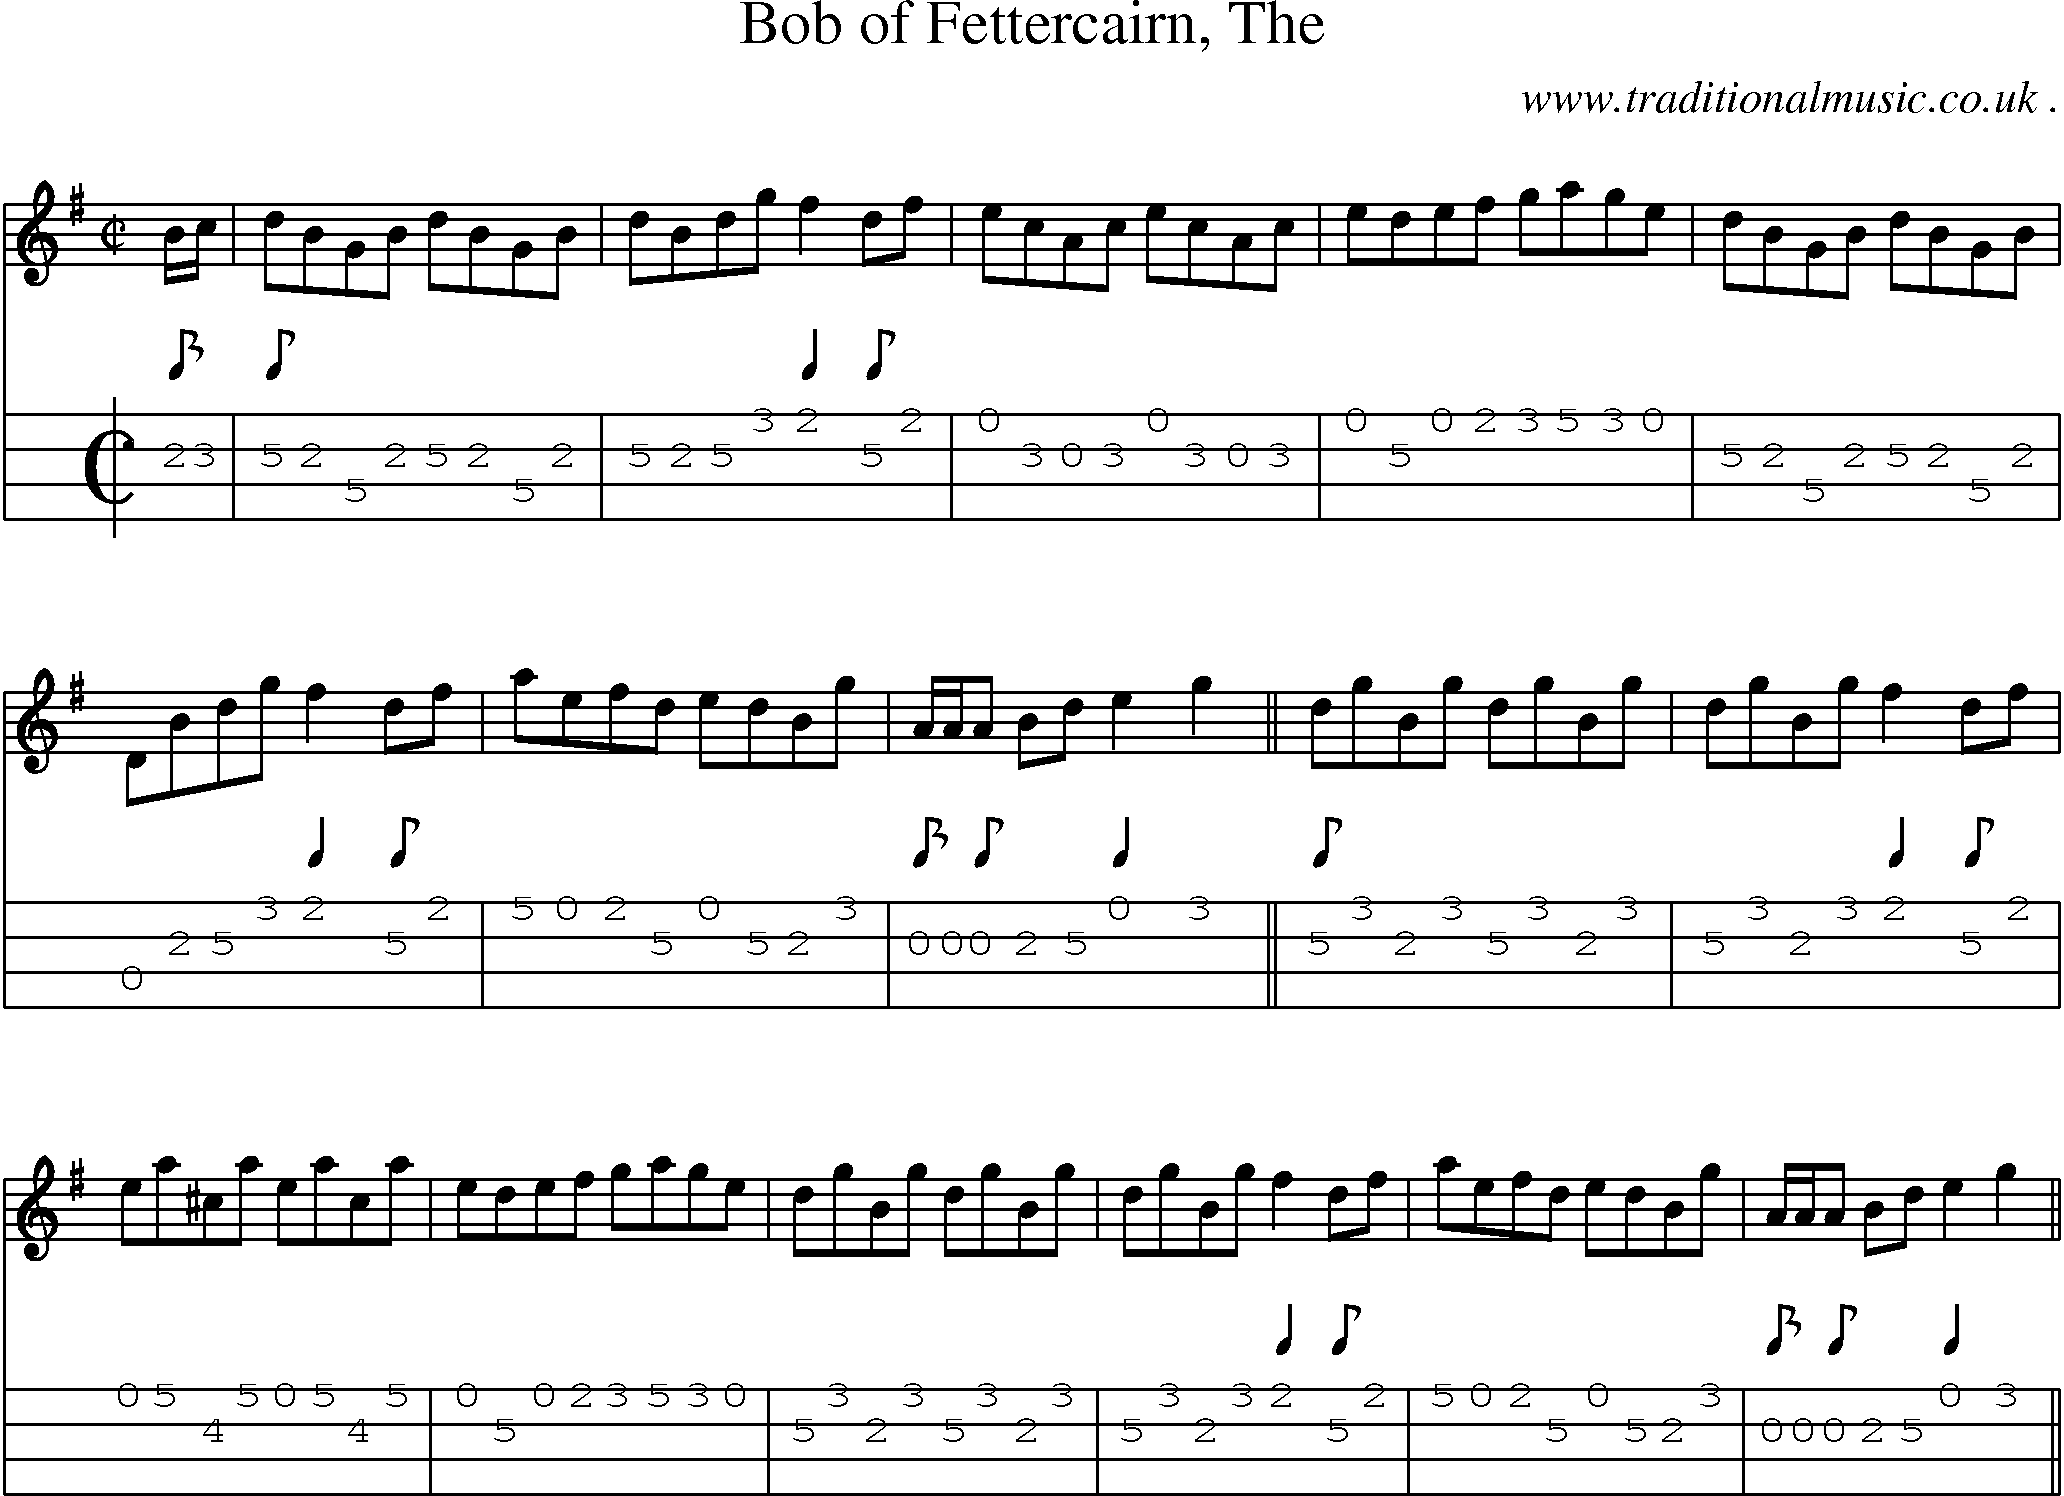 Sheet-music  score, Chords and Mandolin Tabs for Bob Of Fettercairn The